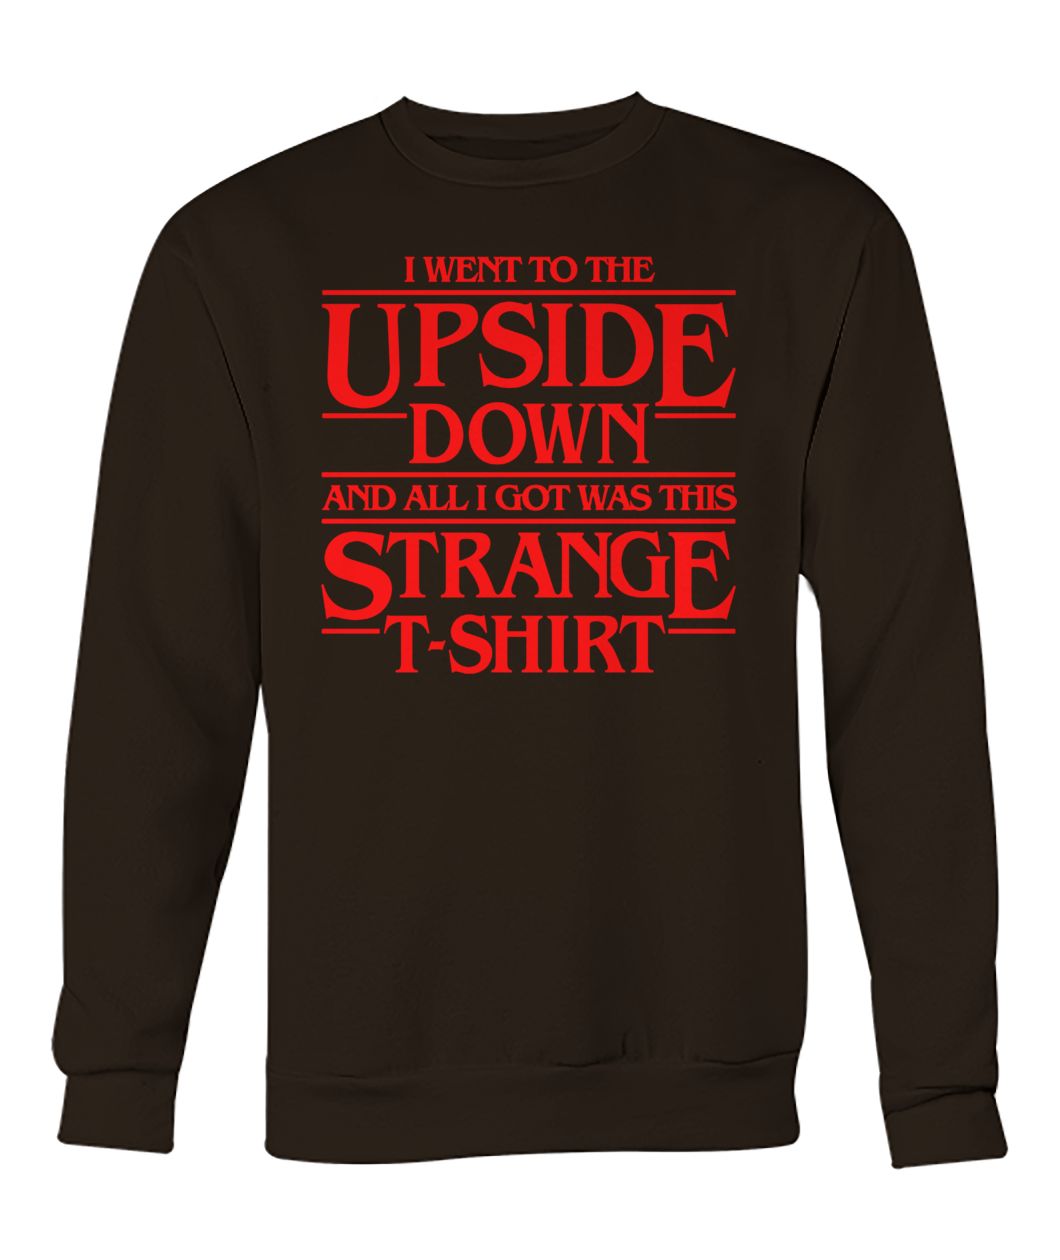 I went to the upside down and all i got was this strange t-shirt crew neck sweatshirt